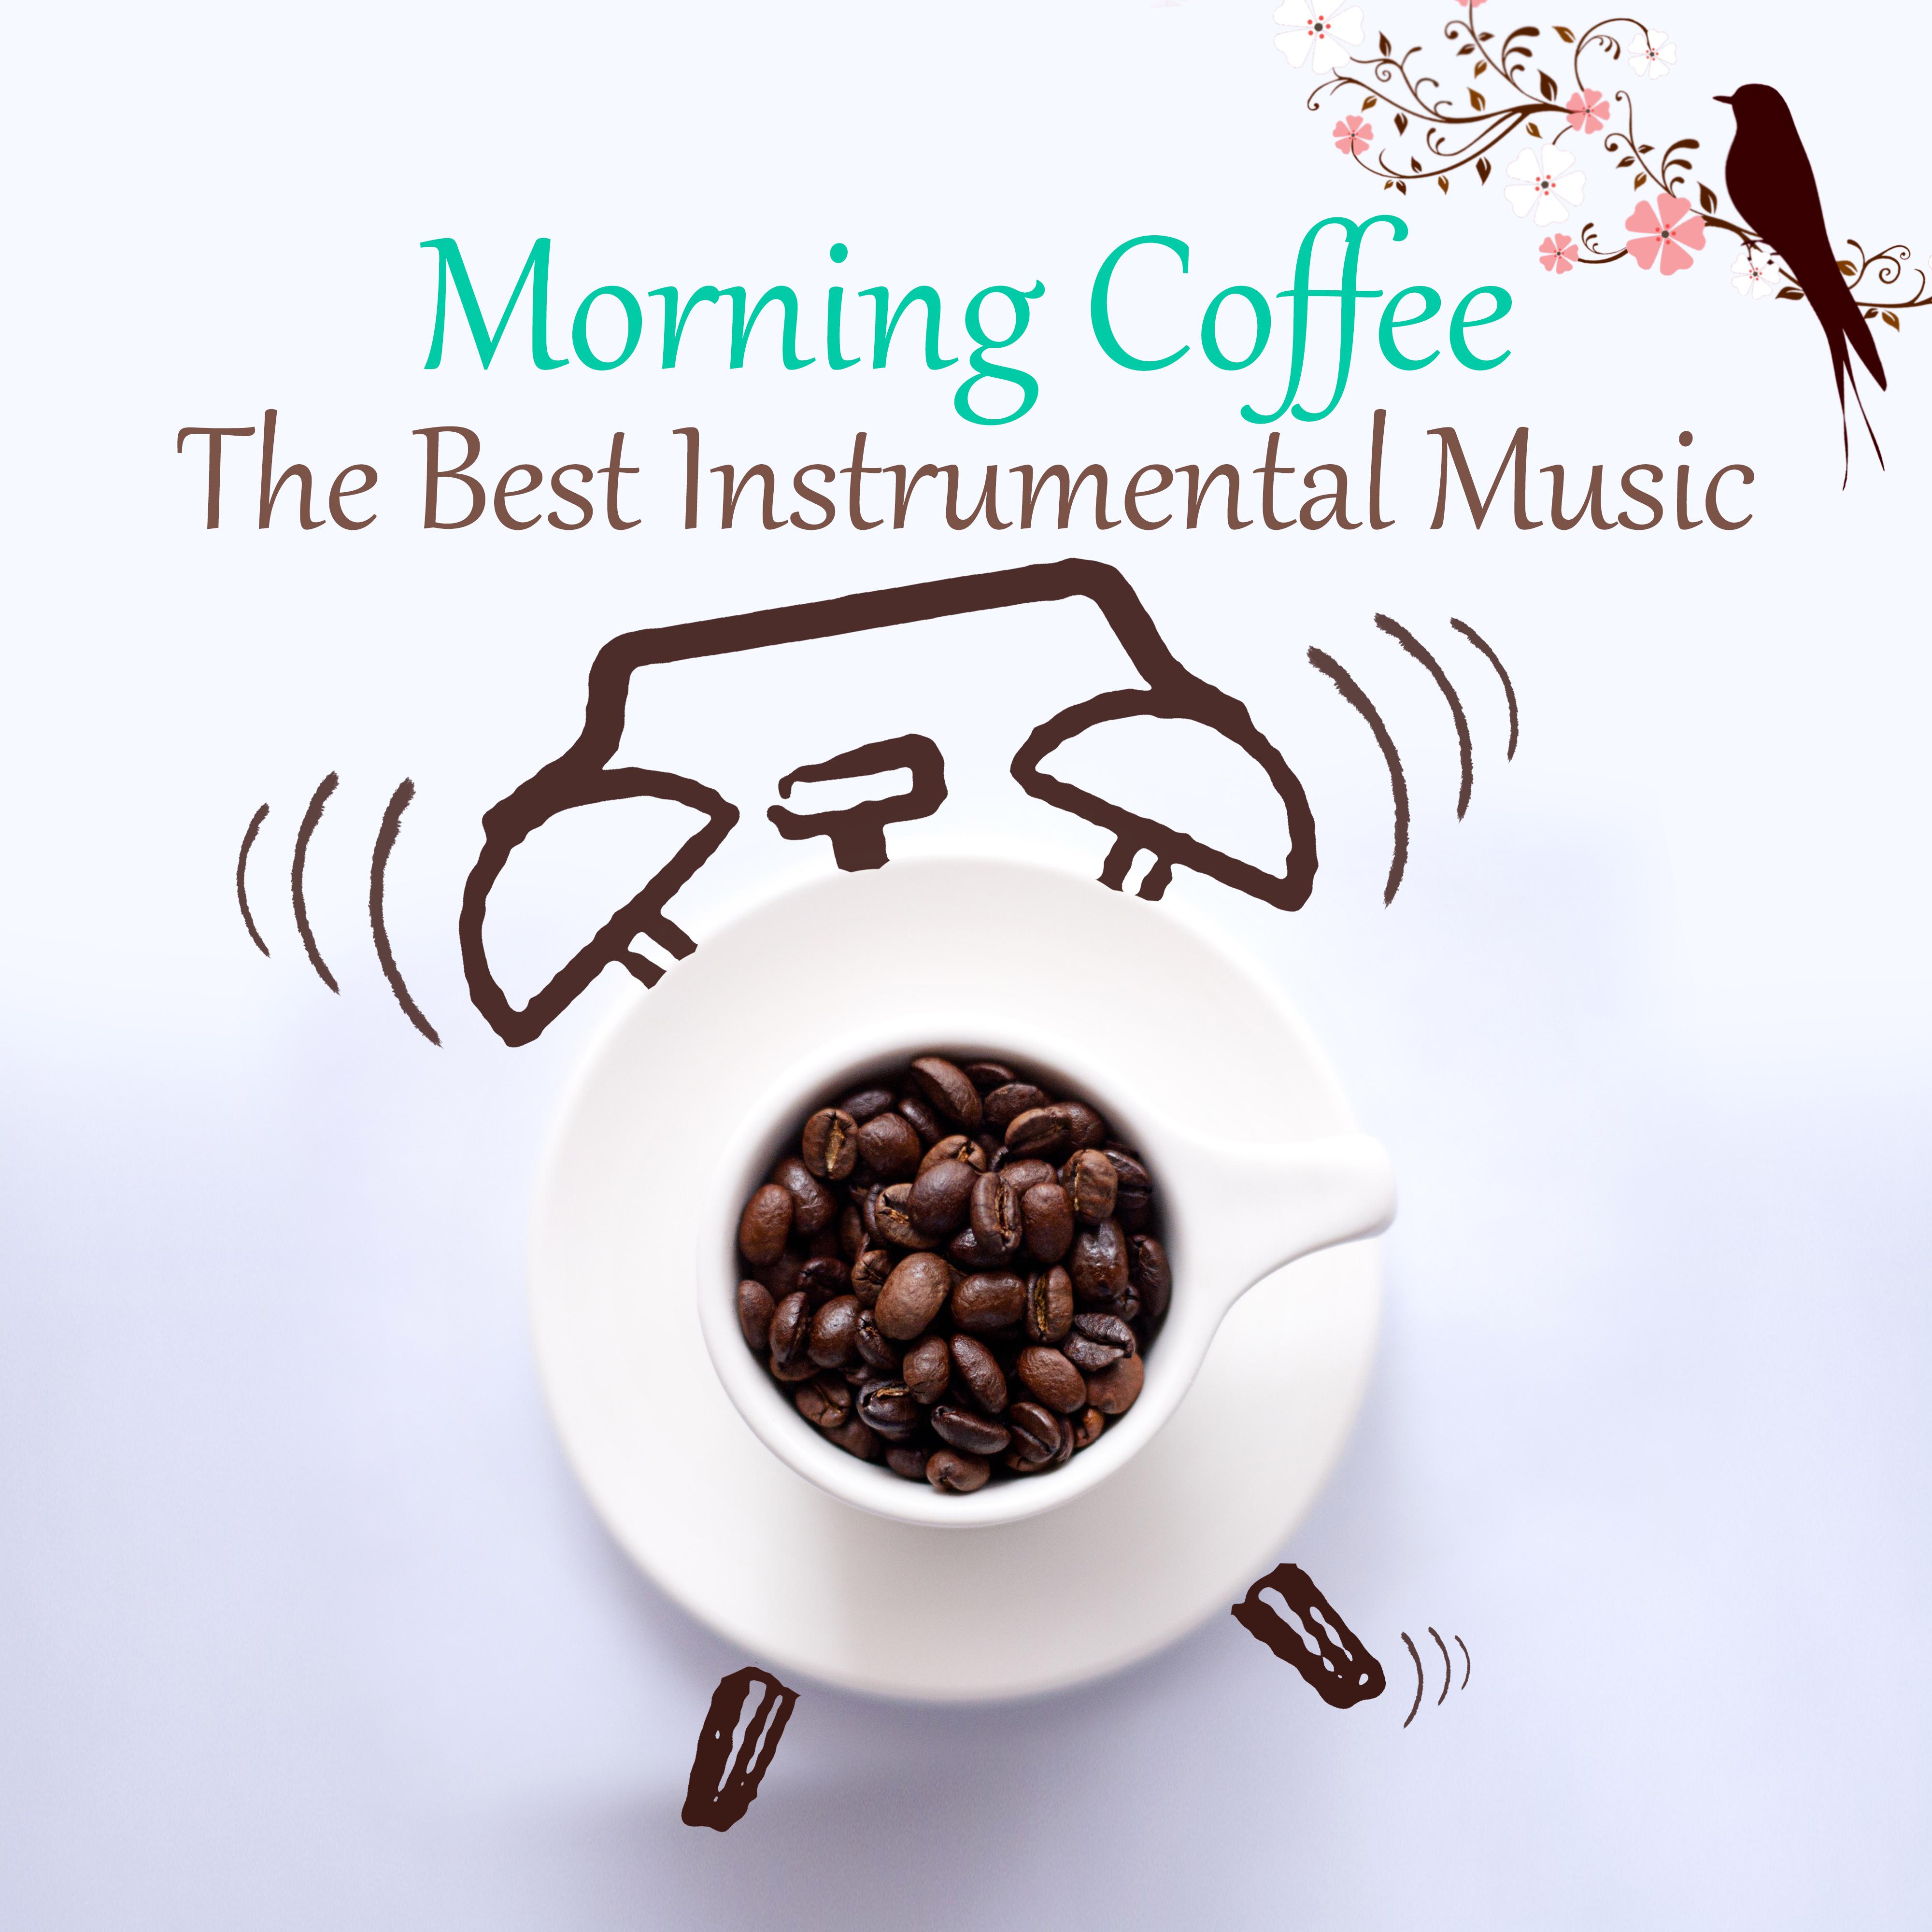 Morning Coffee - The Best Instrumental Lounge Music for Wake Up, Start a Good Day with Relaxing Piano and Soft Guitar, Mood Music